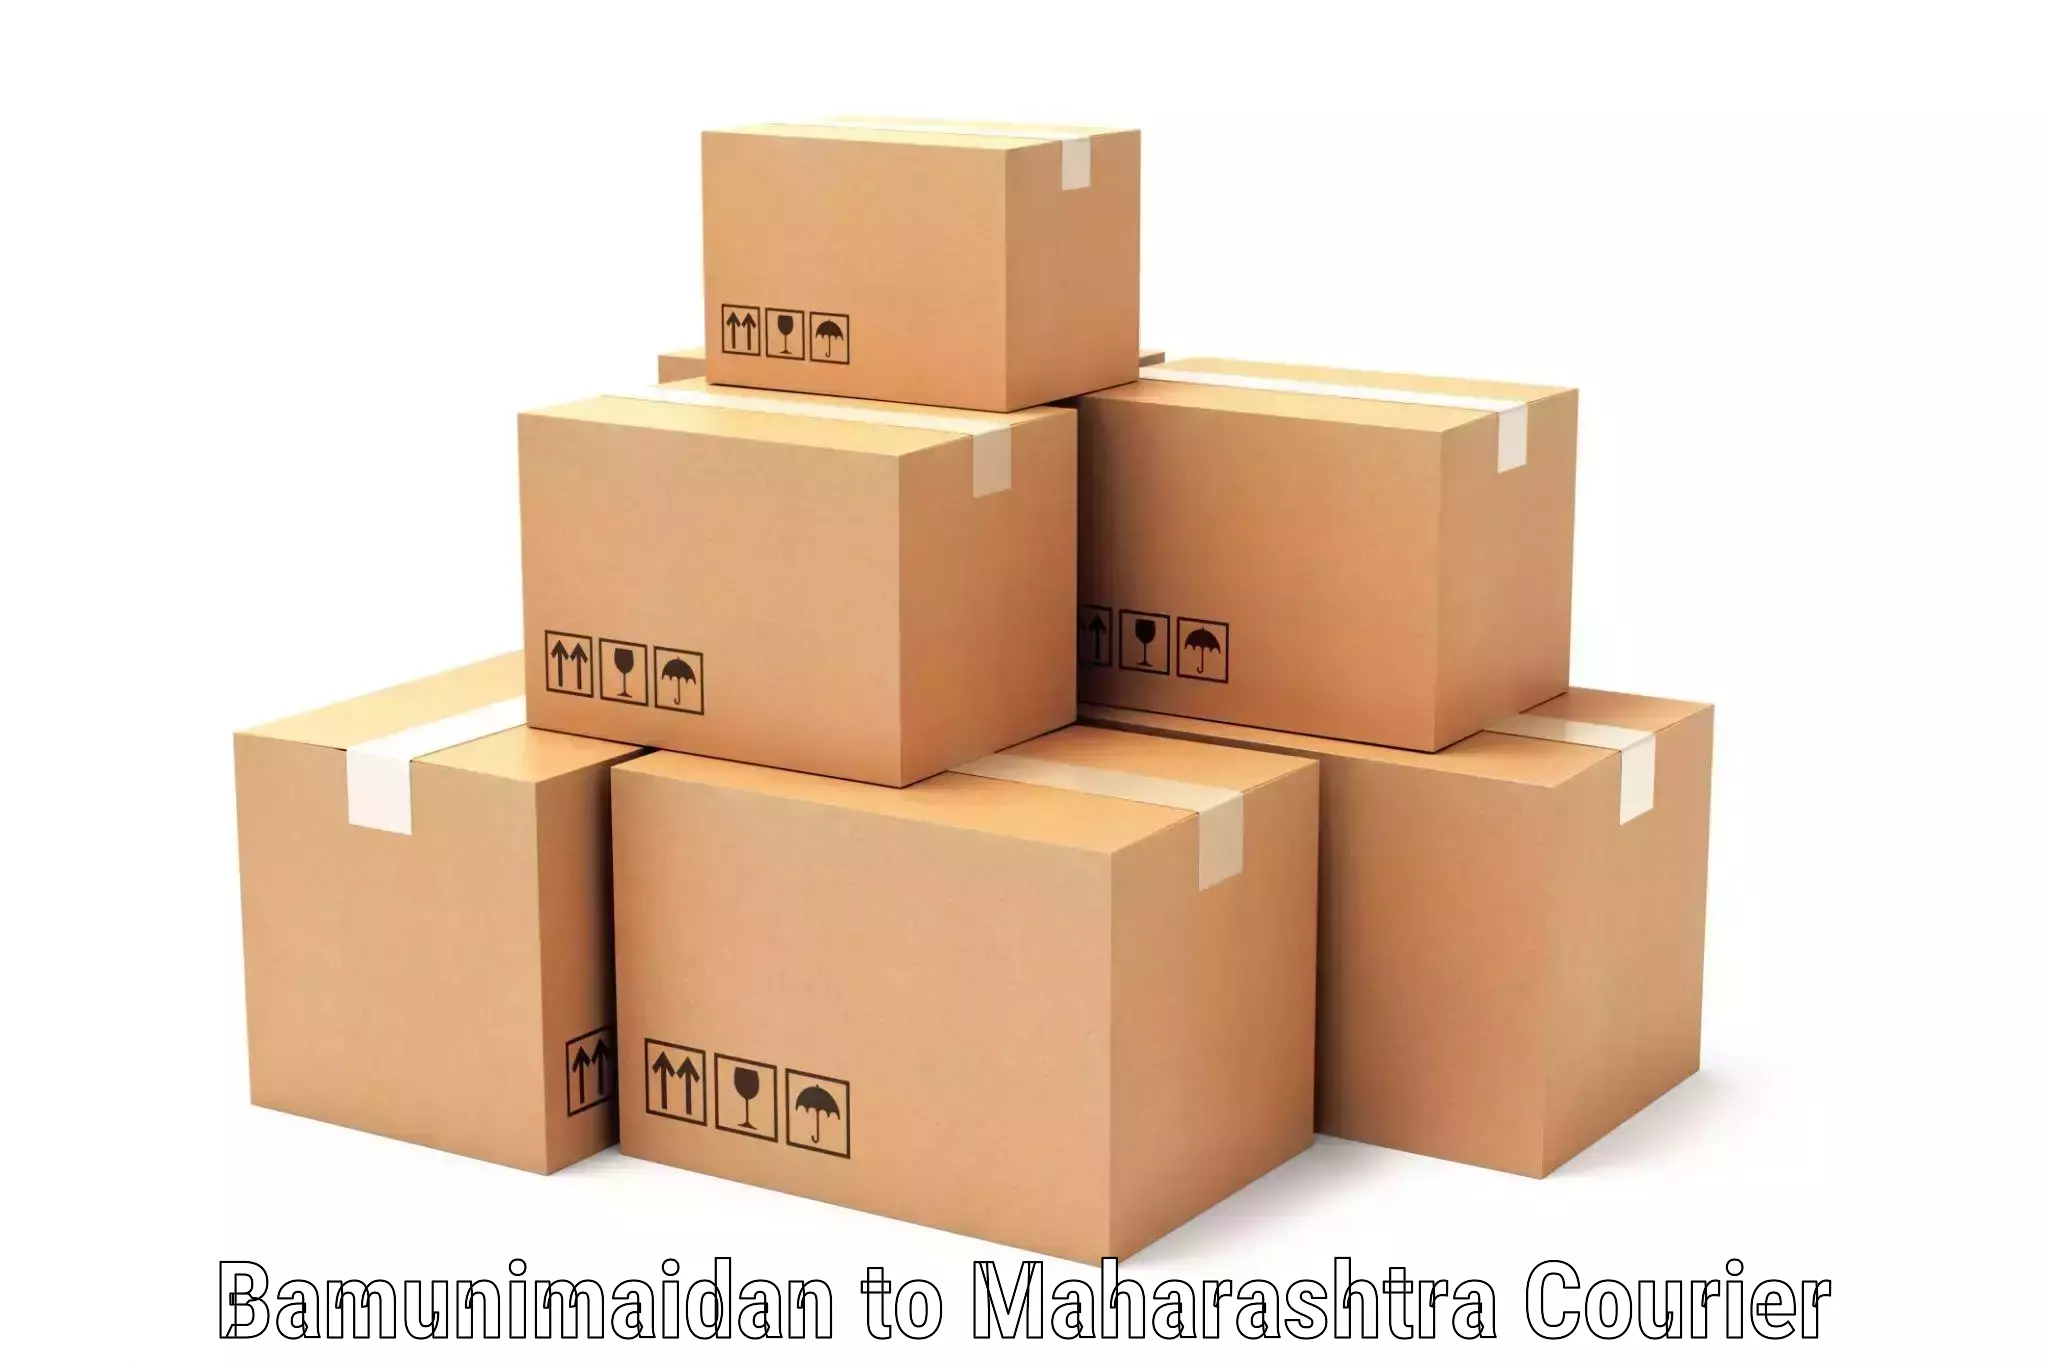 Professional courier services in Bamunimaidan to Mahabaleshwar